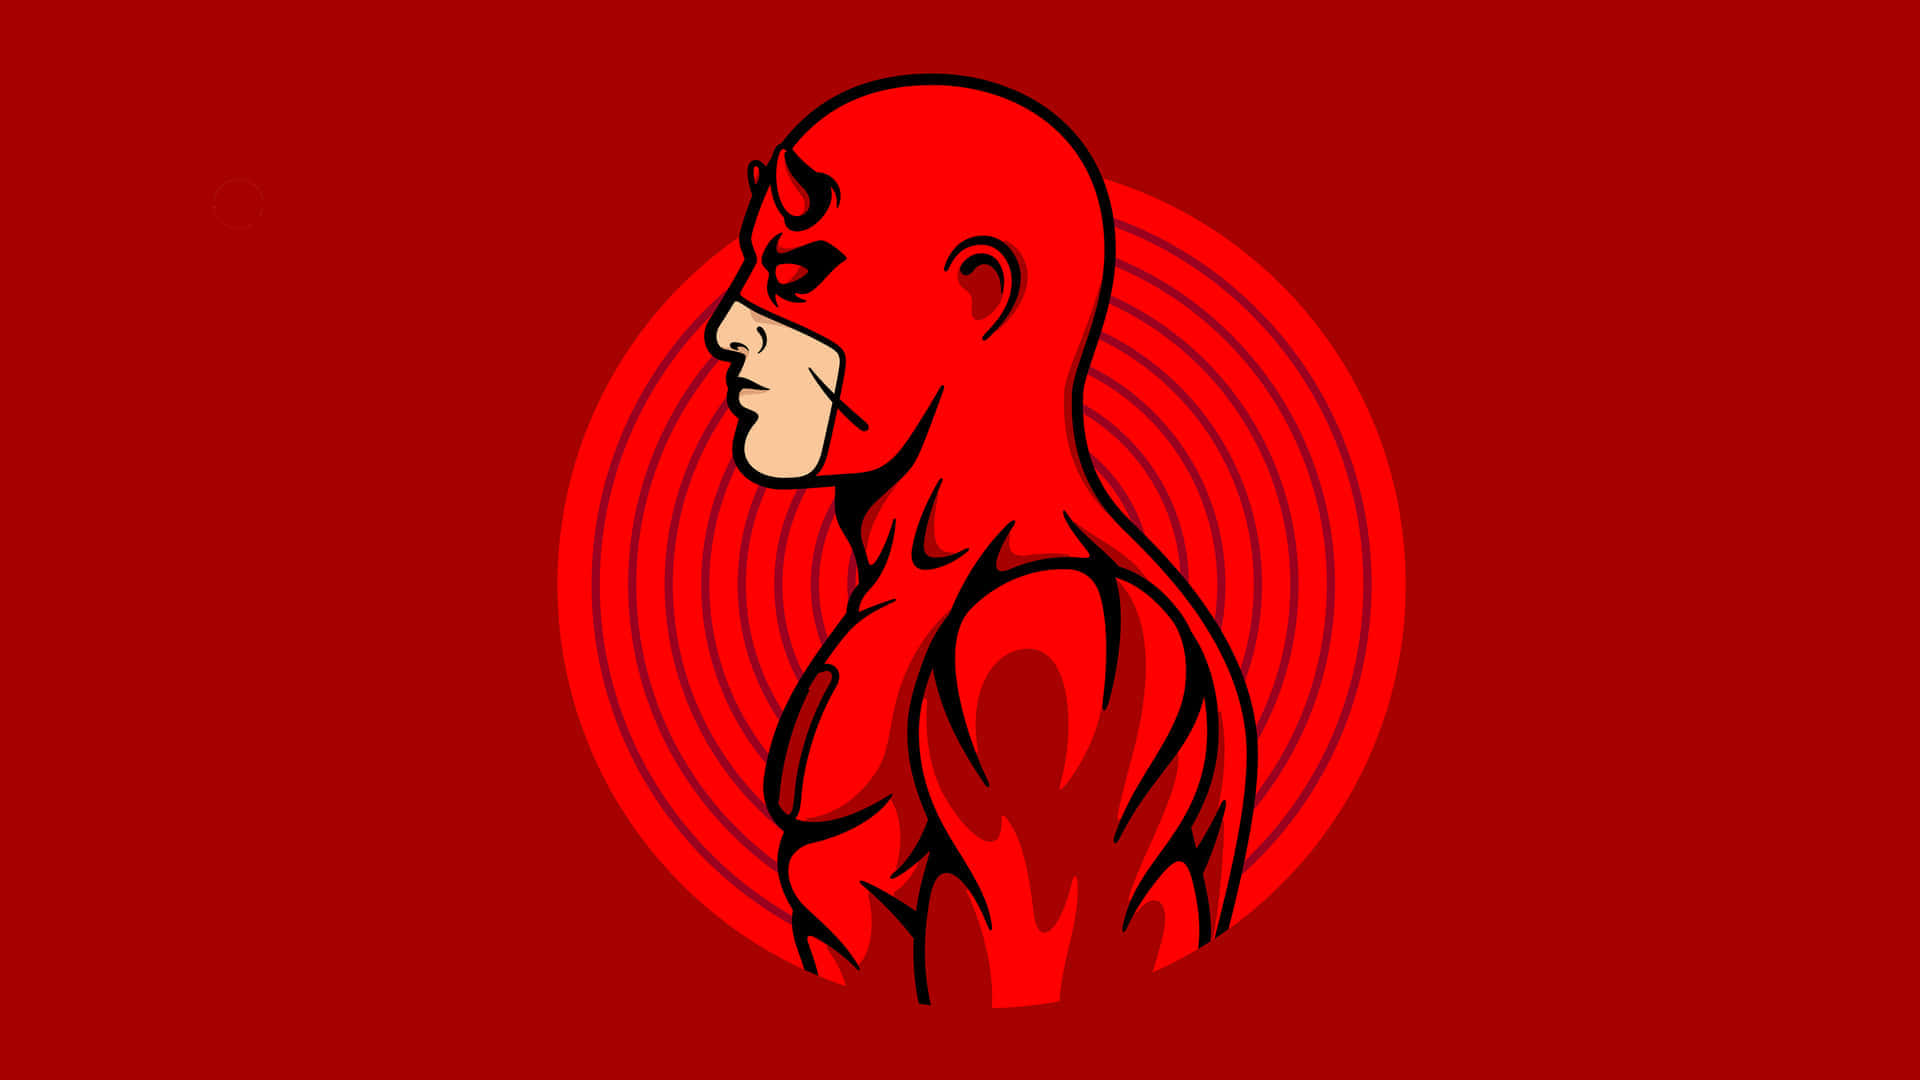 The Man Without Fear Fights For Justice - Daredevil